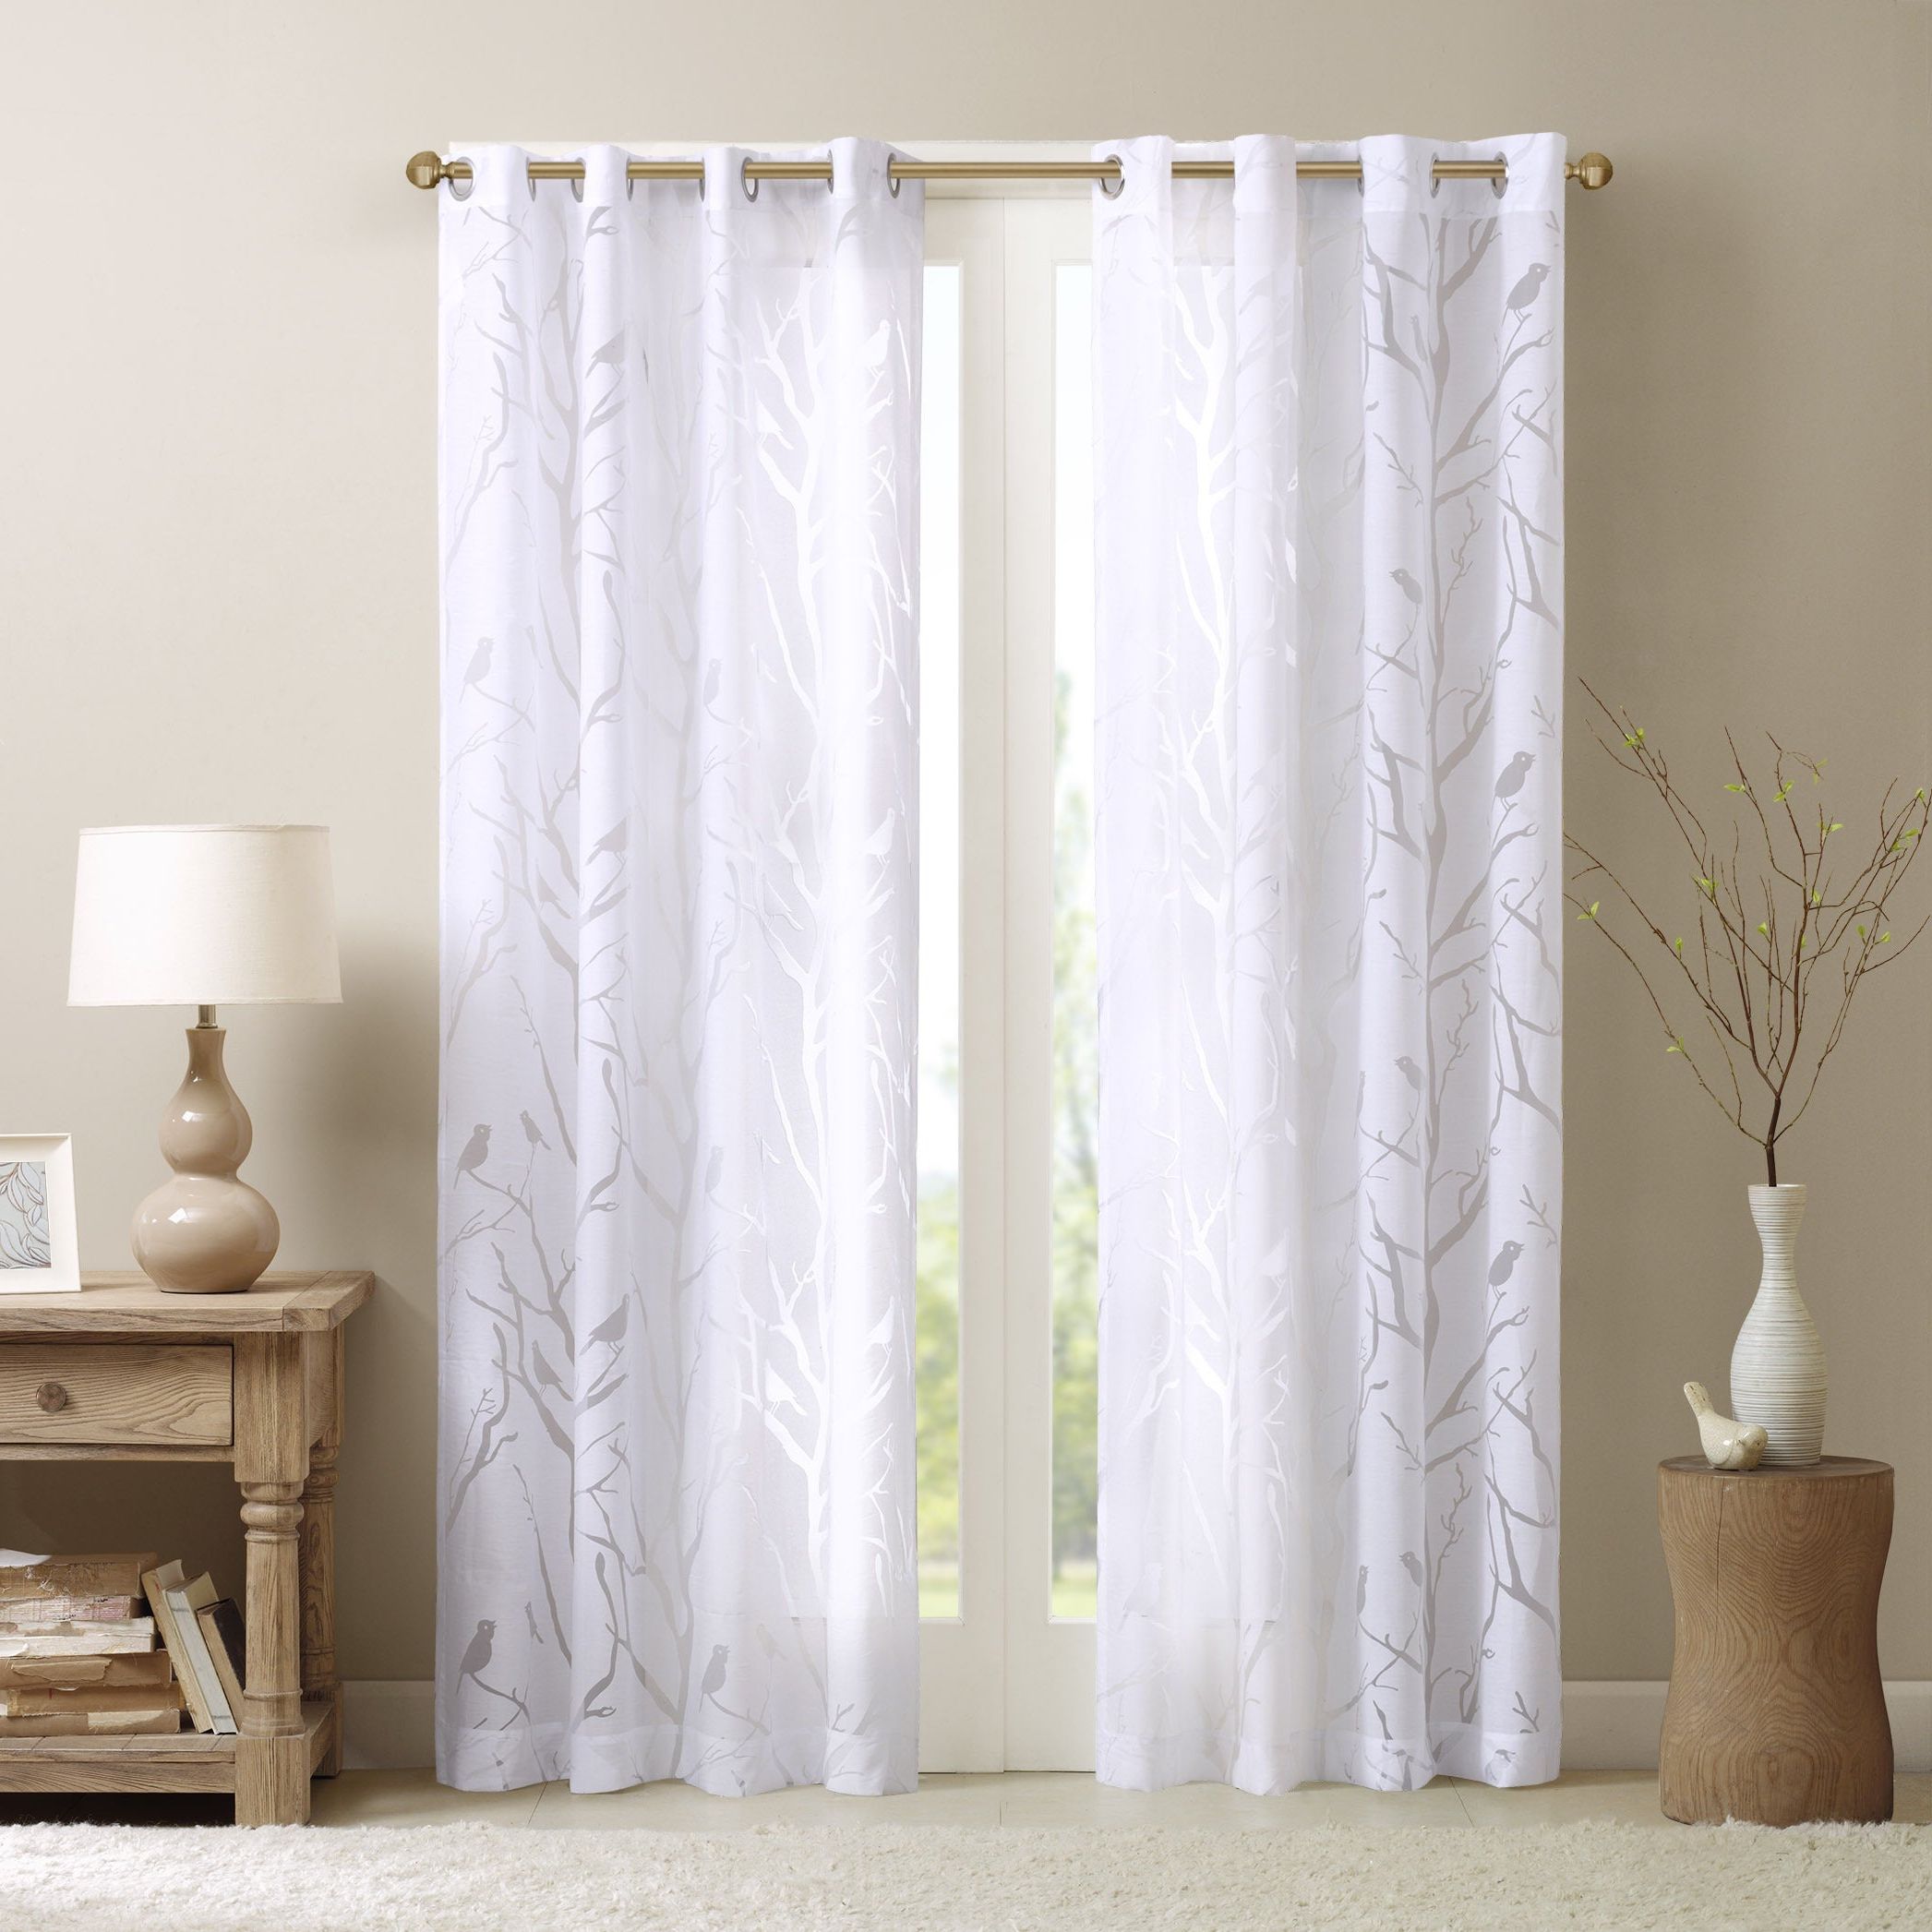 Madison Park Vina Sheer Bird Single Curtain Panel With Regard To Most Recently Released Vina Sheer Bird Single Curtain Panels (View 1 of 20)